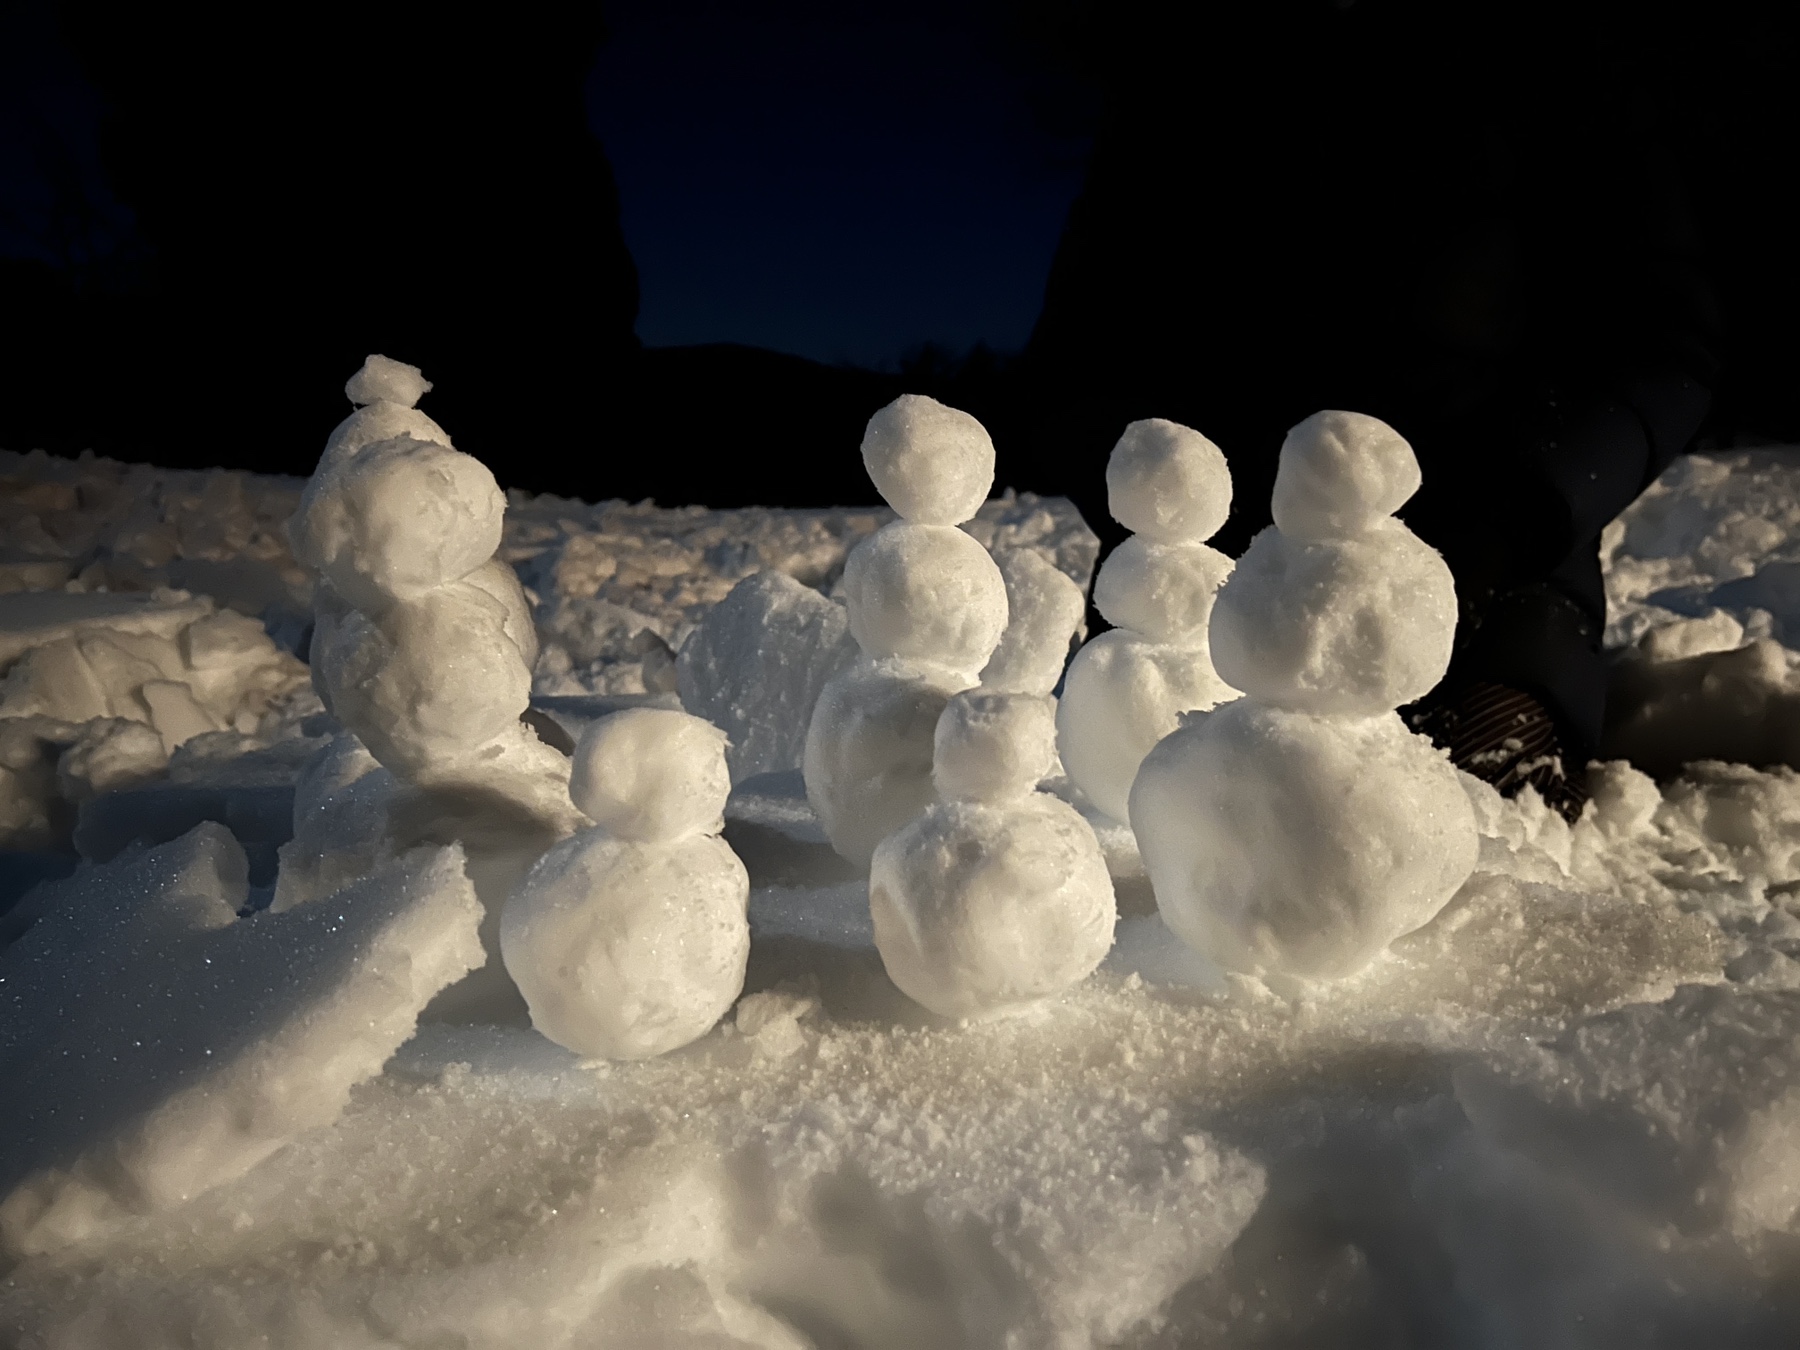 a cluster of seven small snow people gathered together